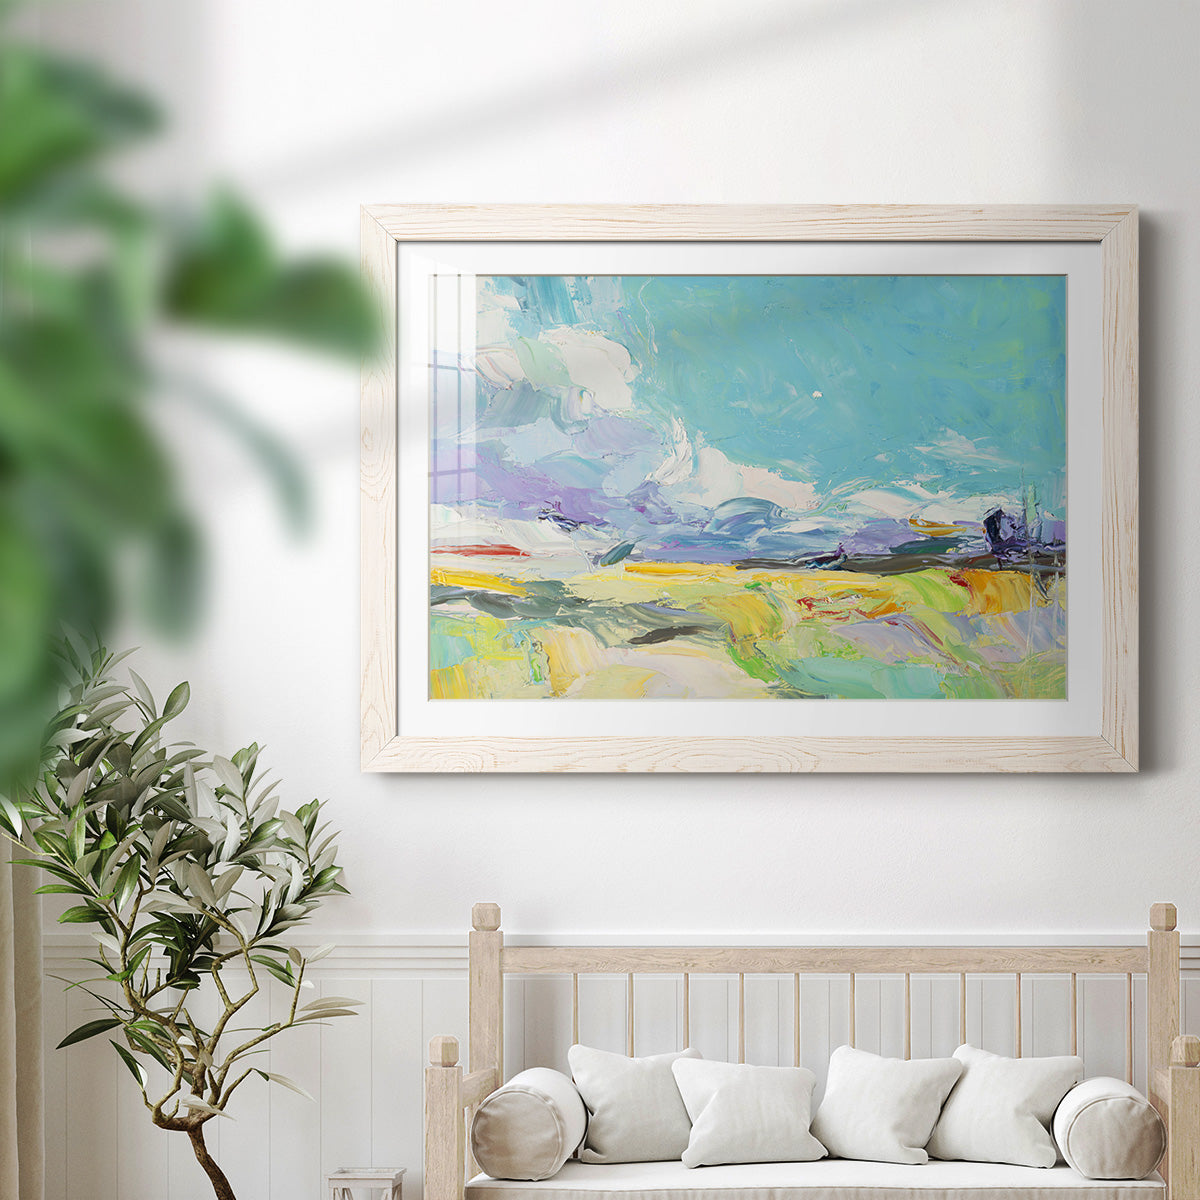 Travels-Premium Framed Print - Ready to Hang